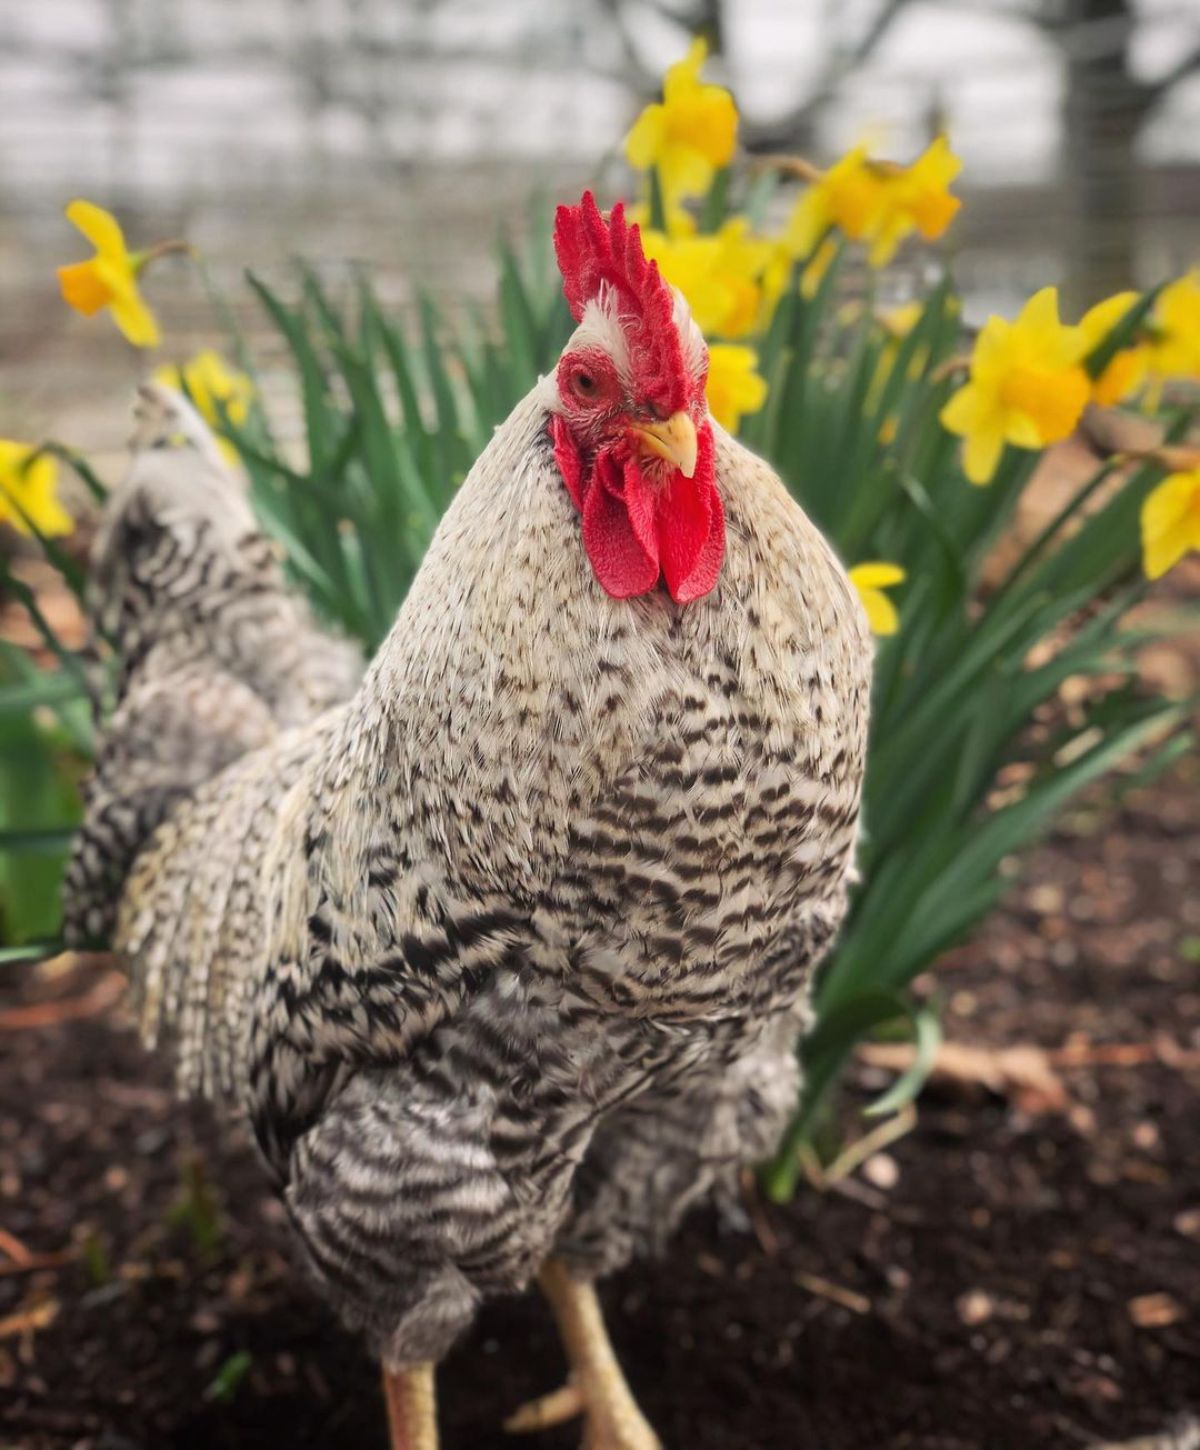 An adorable barred Holland rooster in a garden with flowering daffodils.